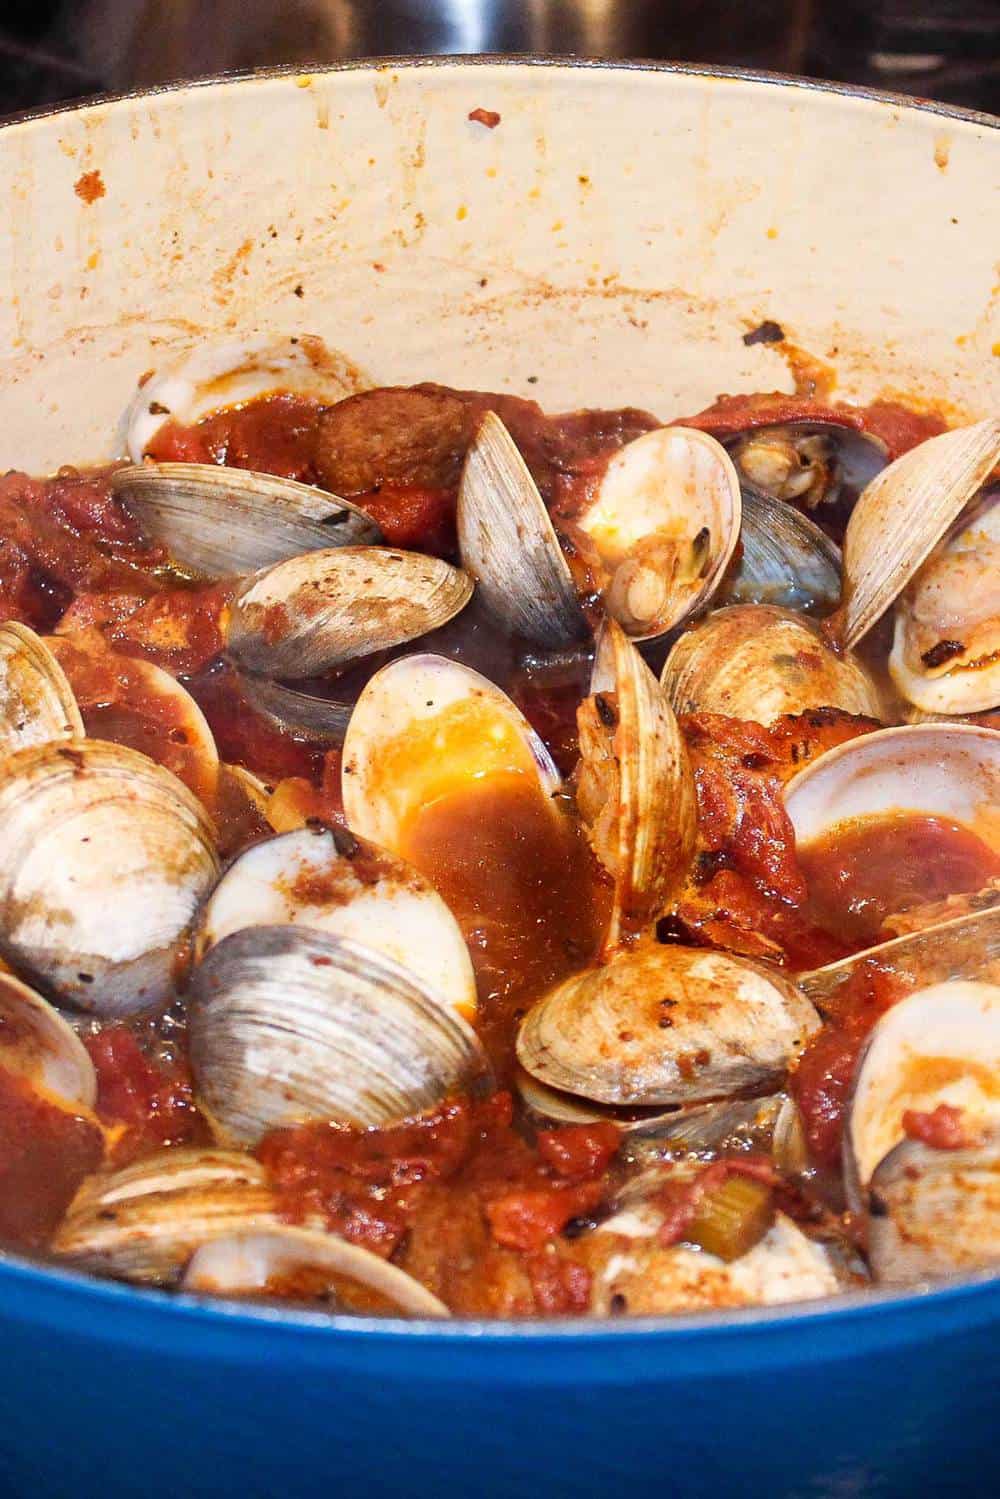 Clams opening in a stew of Portuguese-Style Clam Chowder